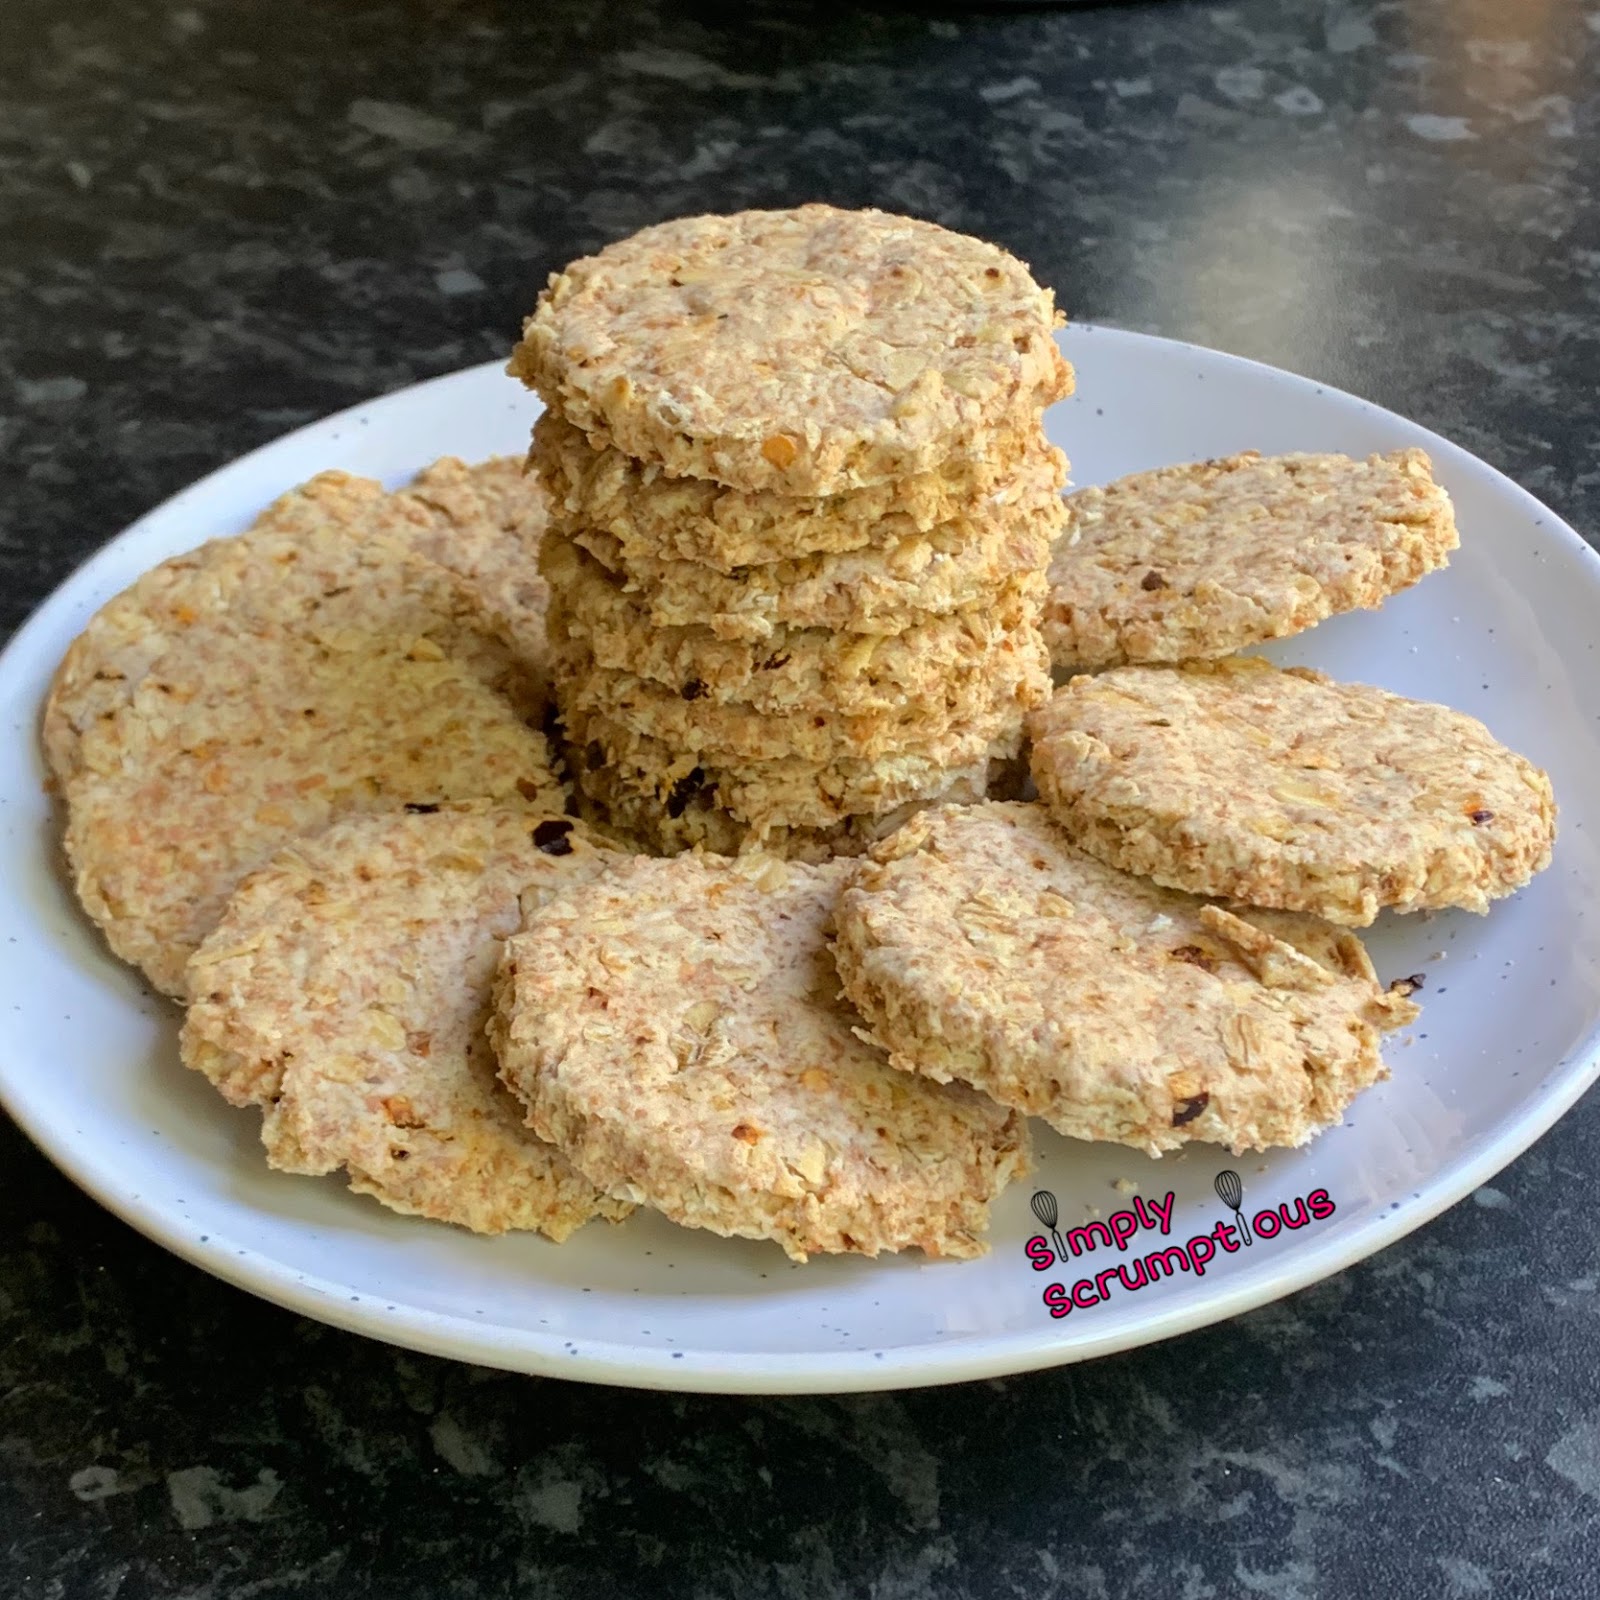 Savoury Chipotle Chilli Oat Biscuits